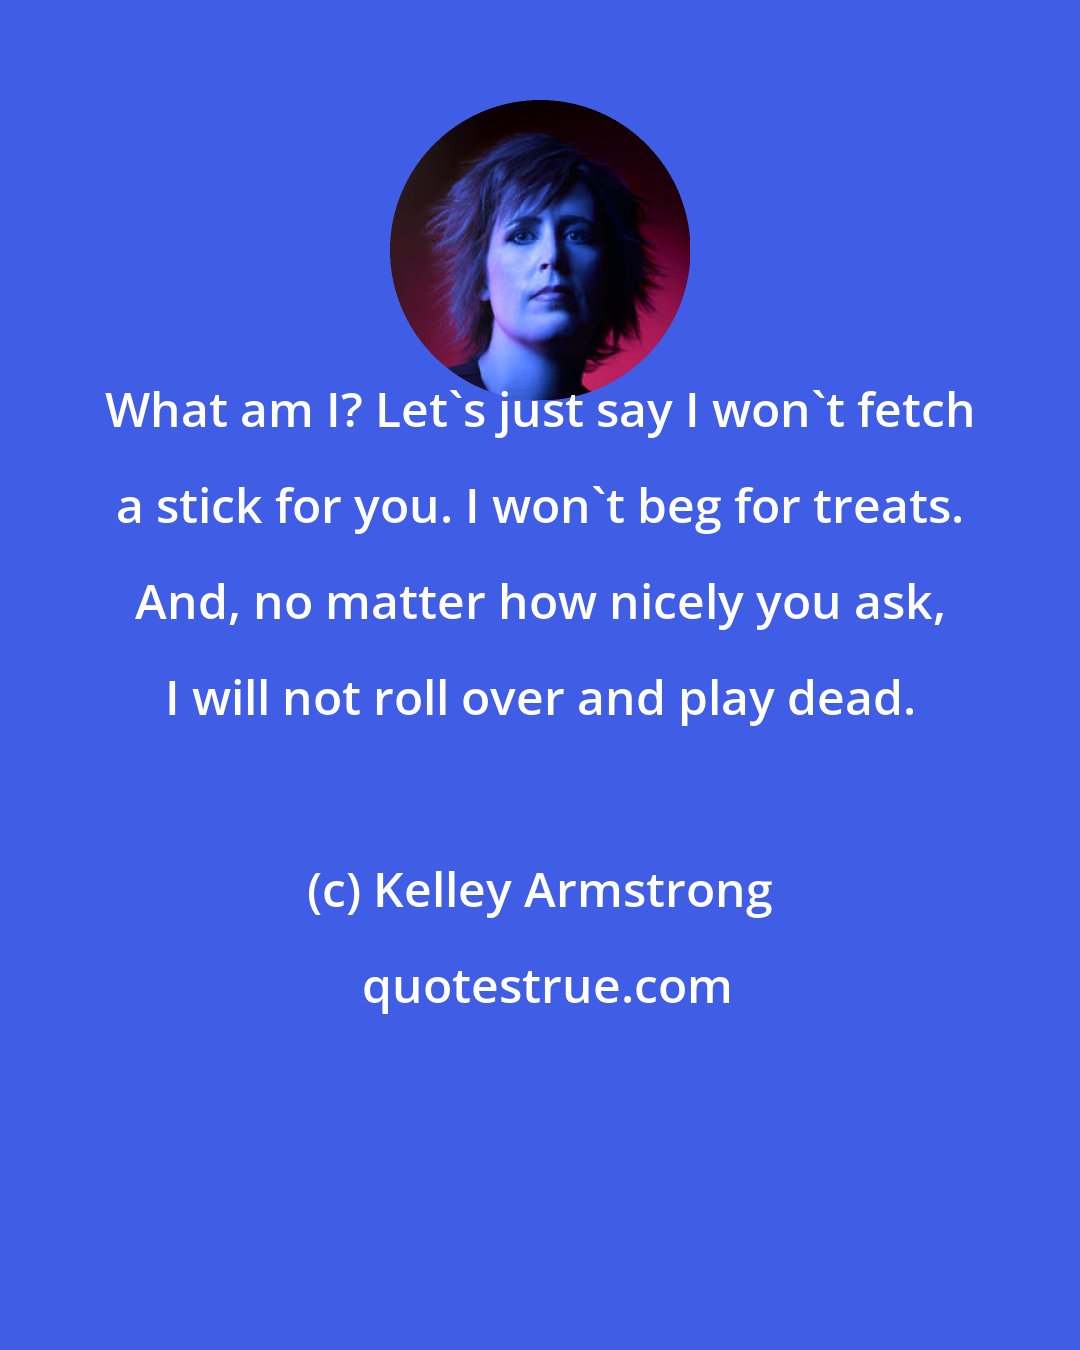 Kelley Armstrong: What am I? Let's just say I won't fetch a stick for you. I won't beg for treats. And, no matter how nicely you ask, I will not roll over and play dead.